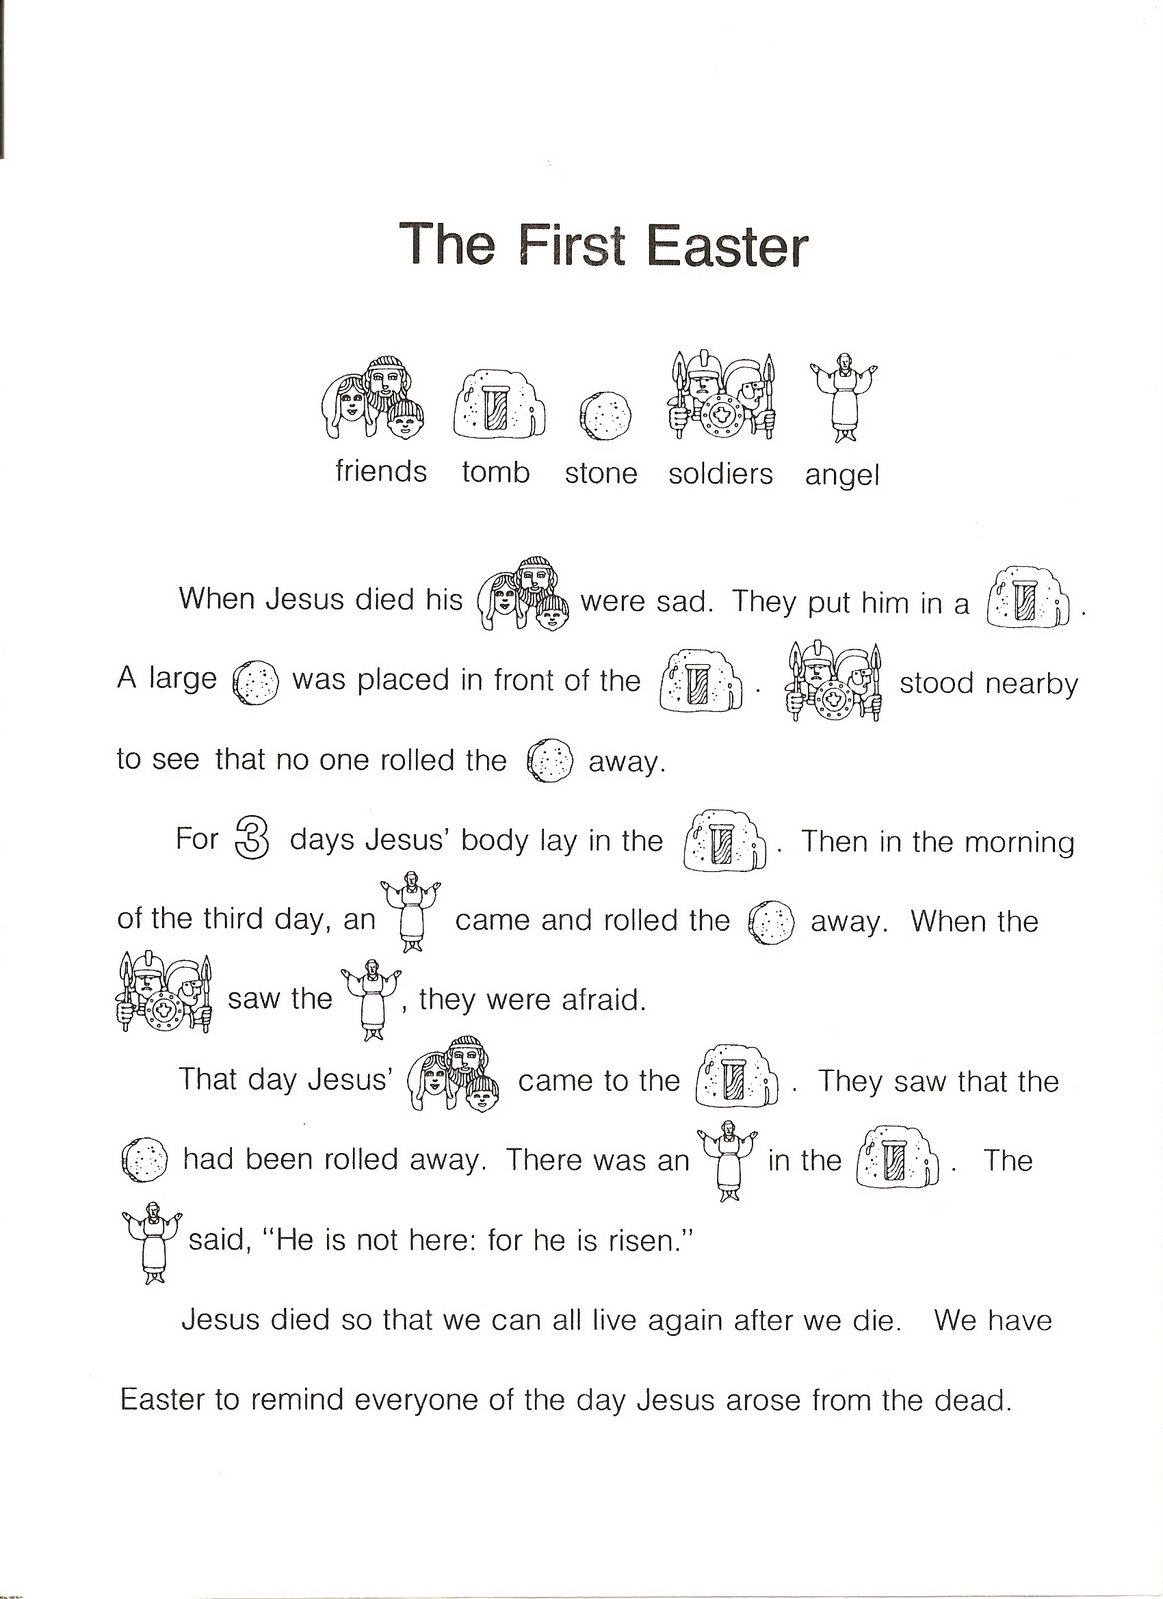 [Easter+picture+story.jpg]